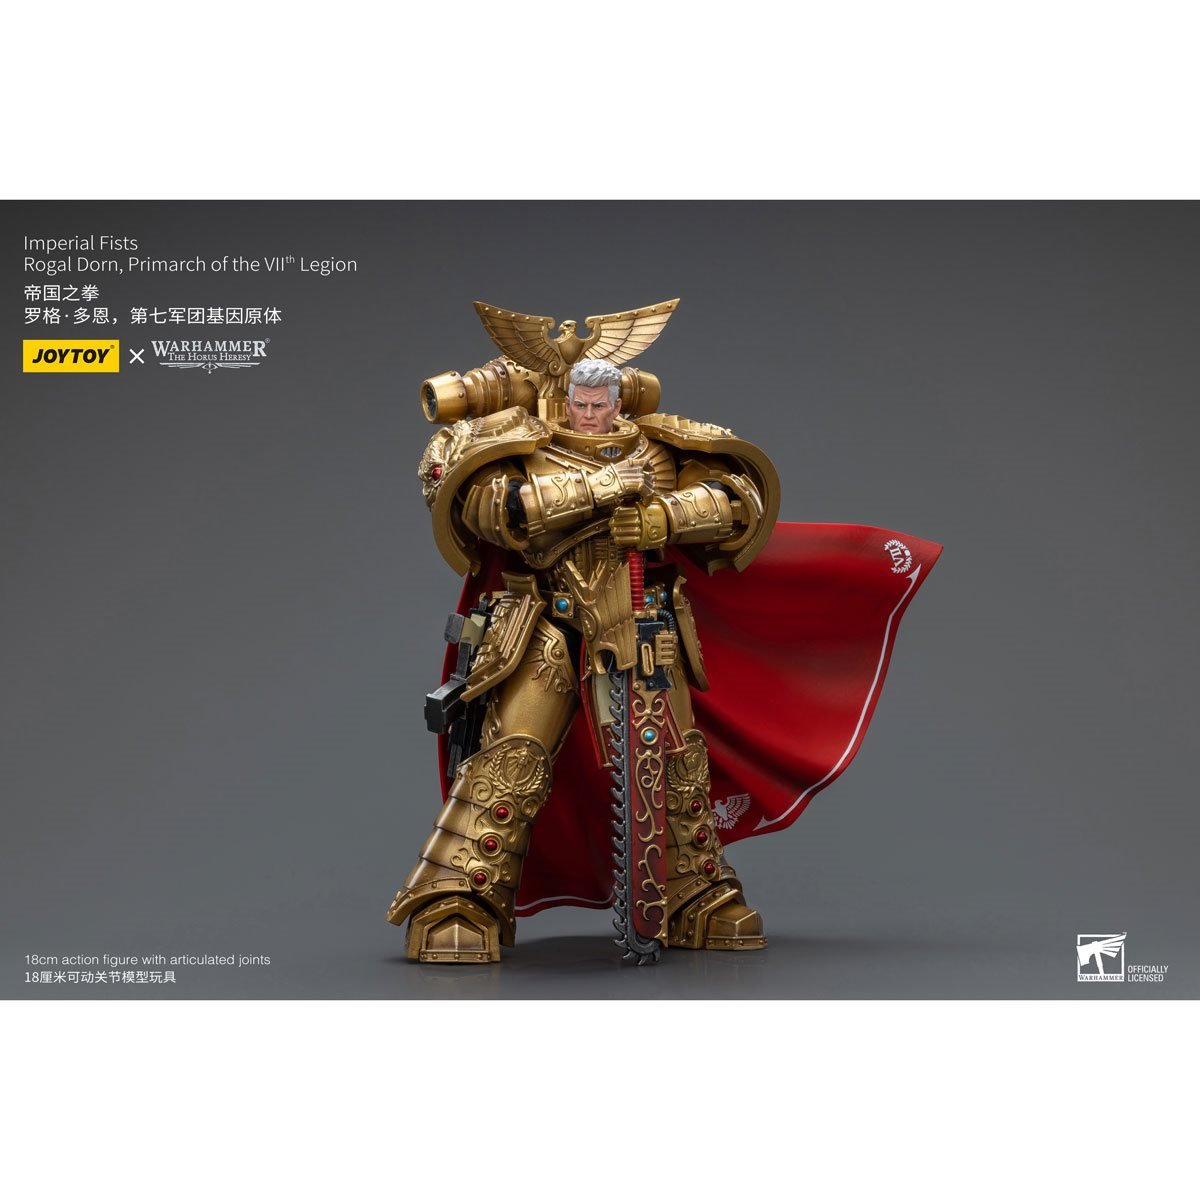 JOY TOY Warhammer 40,000 Imperial Fists Rogal Dorn Primarch of the VIIth Legion 1:18 Scale Action Figure